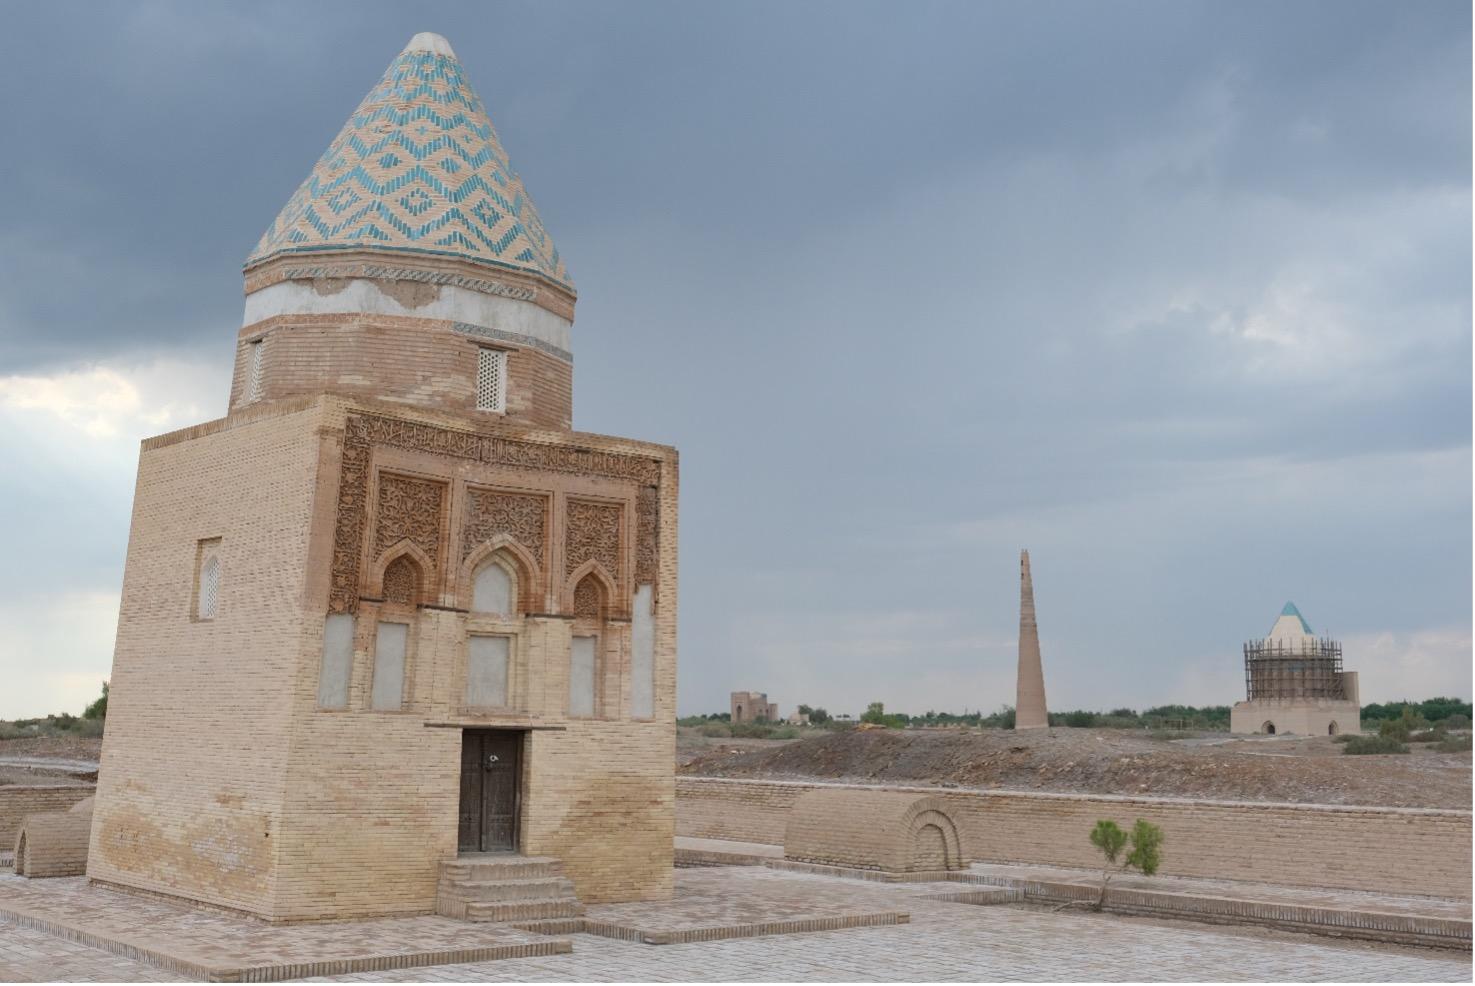 The II Arslan Mausoleum is the oldest remaning structure of the ancient city, and was built to memorialize the ruler II Arslan.